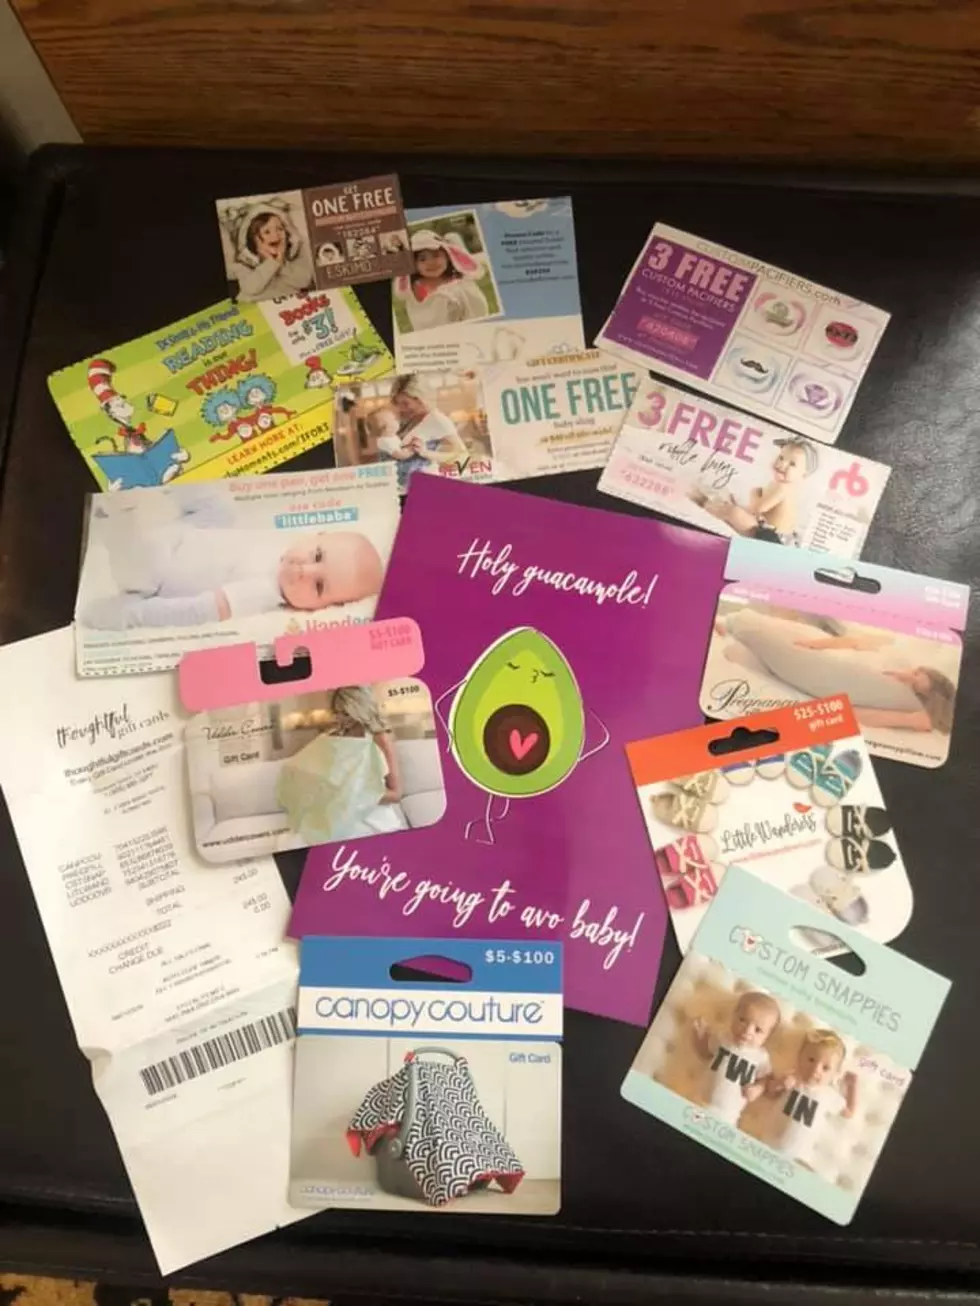 Your Baby Gift Package from Jenny B. Is a Giant Scam